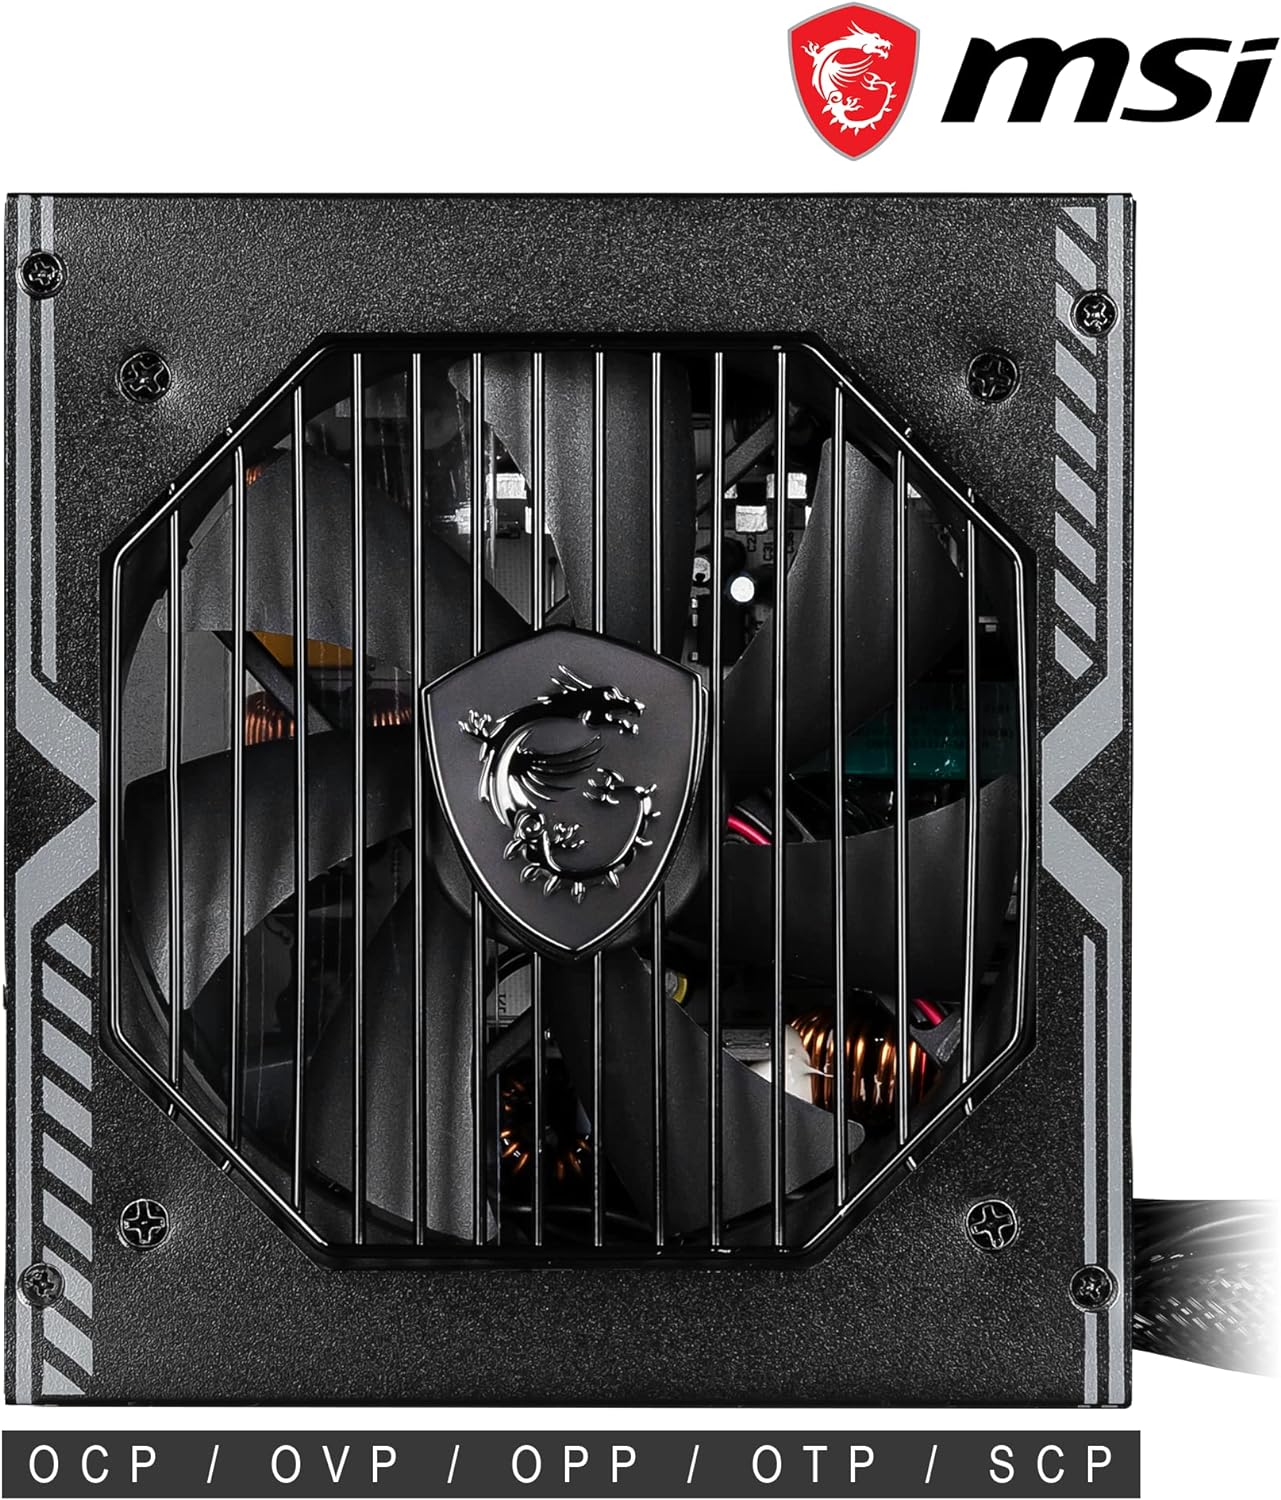 MSI MAG A550BN Gaming Power Supplyr - 80 Plus Bronze Certified 550W - Compact Size - ATX PSU